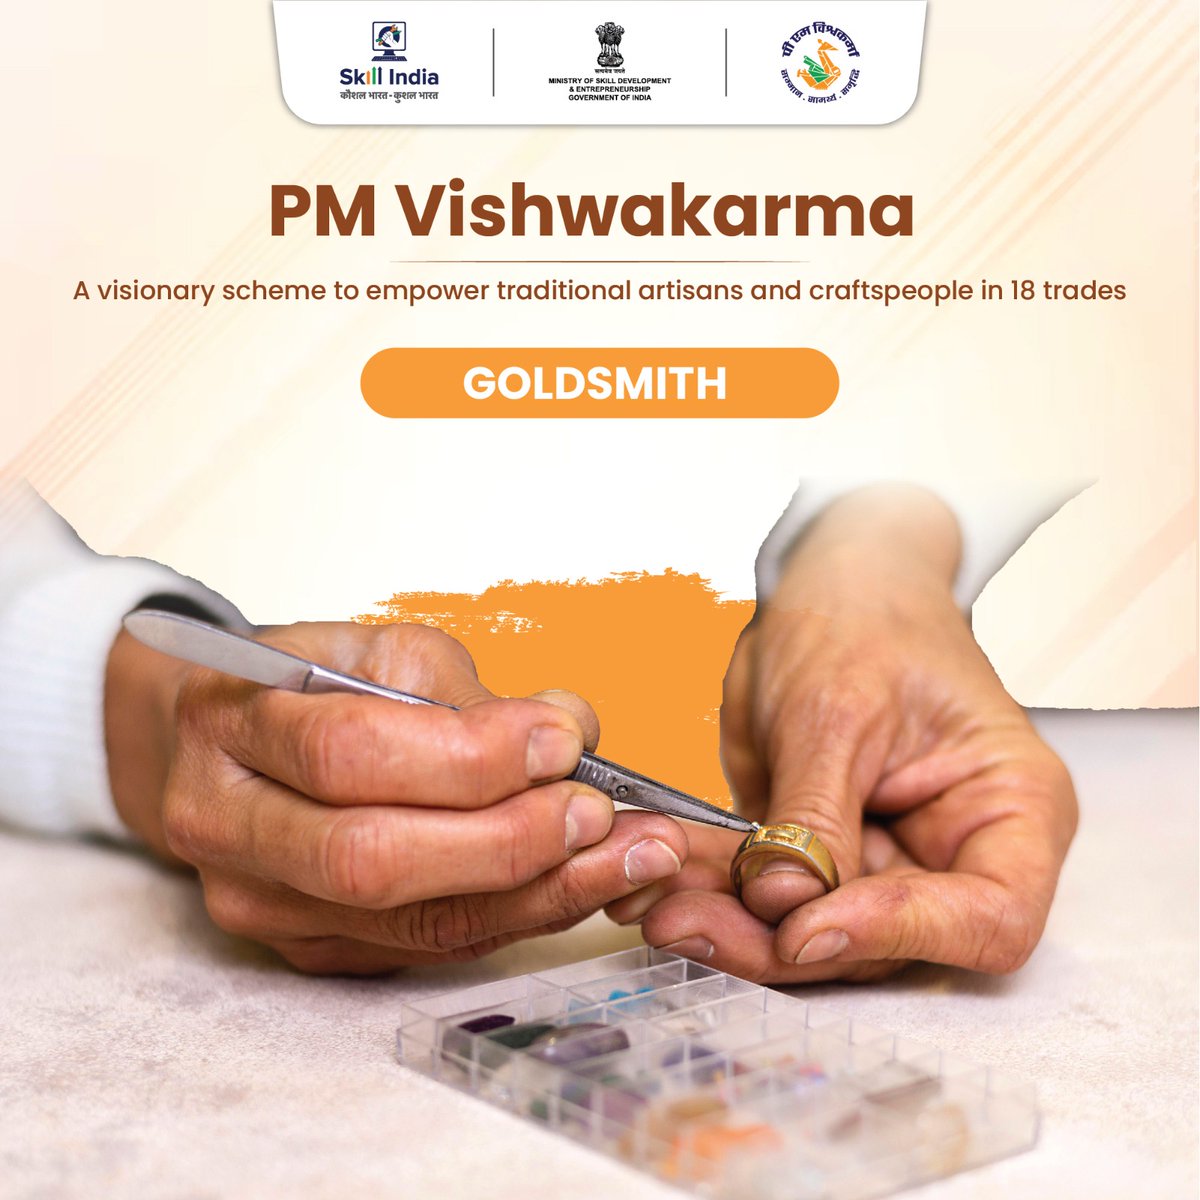 Through PM Vishwakarma, goldsmiths can have a brighter future with training, modern tools, and financial support.
#PMVishwakarma #MSDE #Artisans #SkillIndia #Skills4All